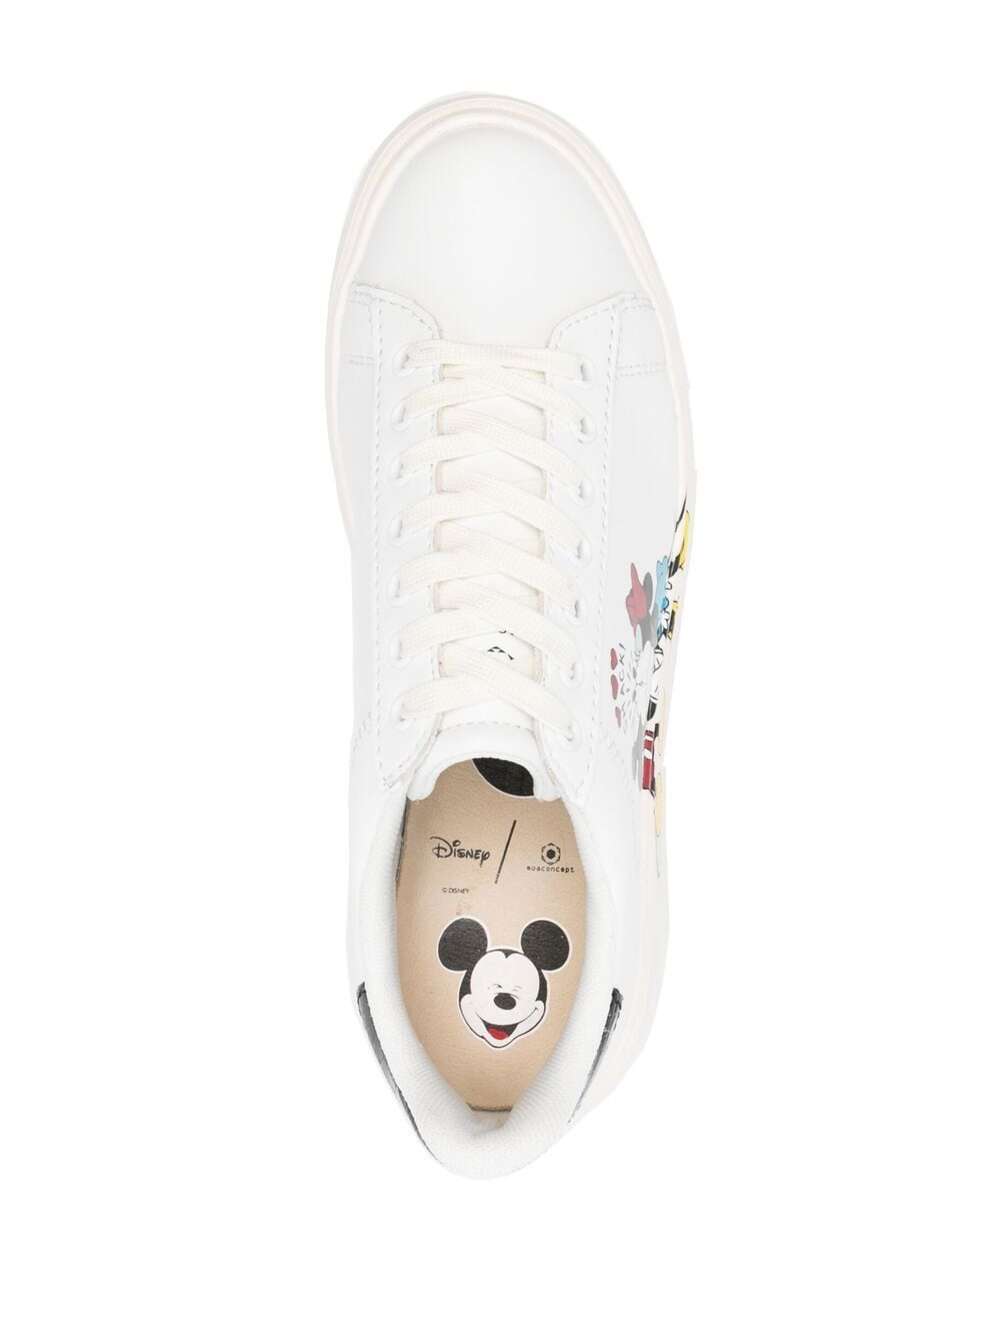 Shop Moa Master Of Arts Moa Womans White Leather Sneakers With Mickey Mouse Kiss Print